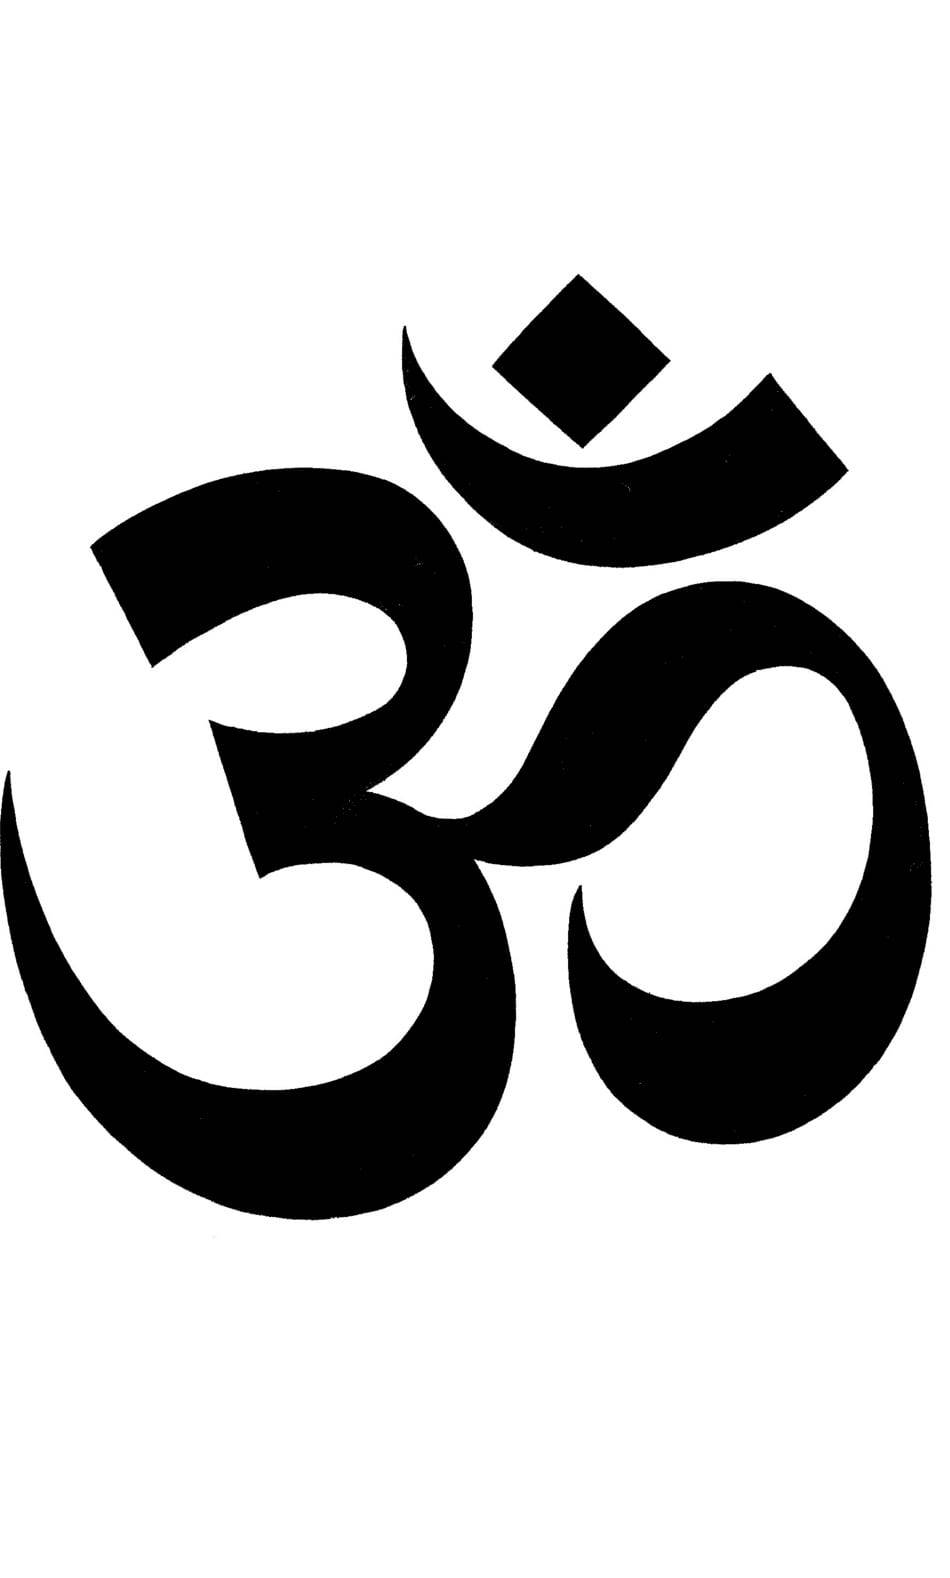 Om Simple Black And White Wallpaper